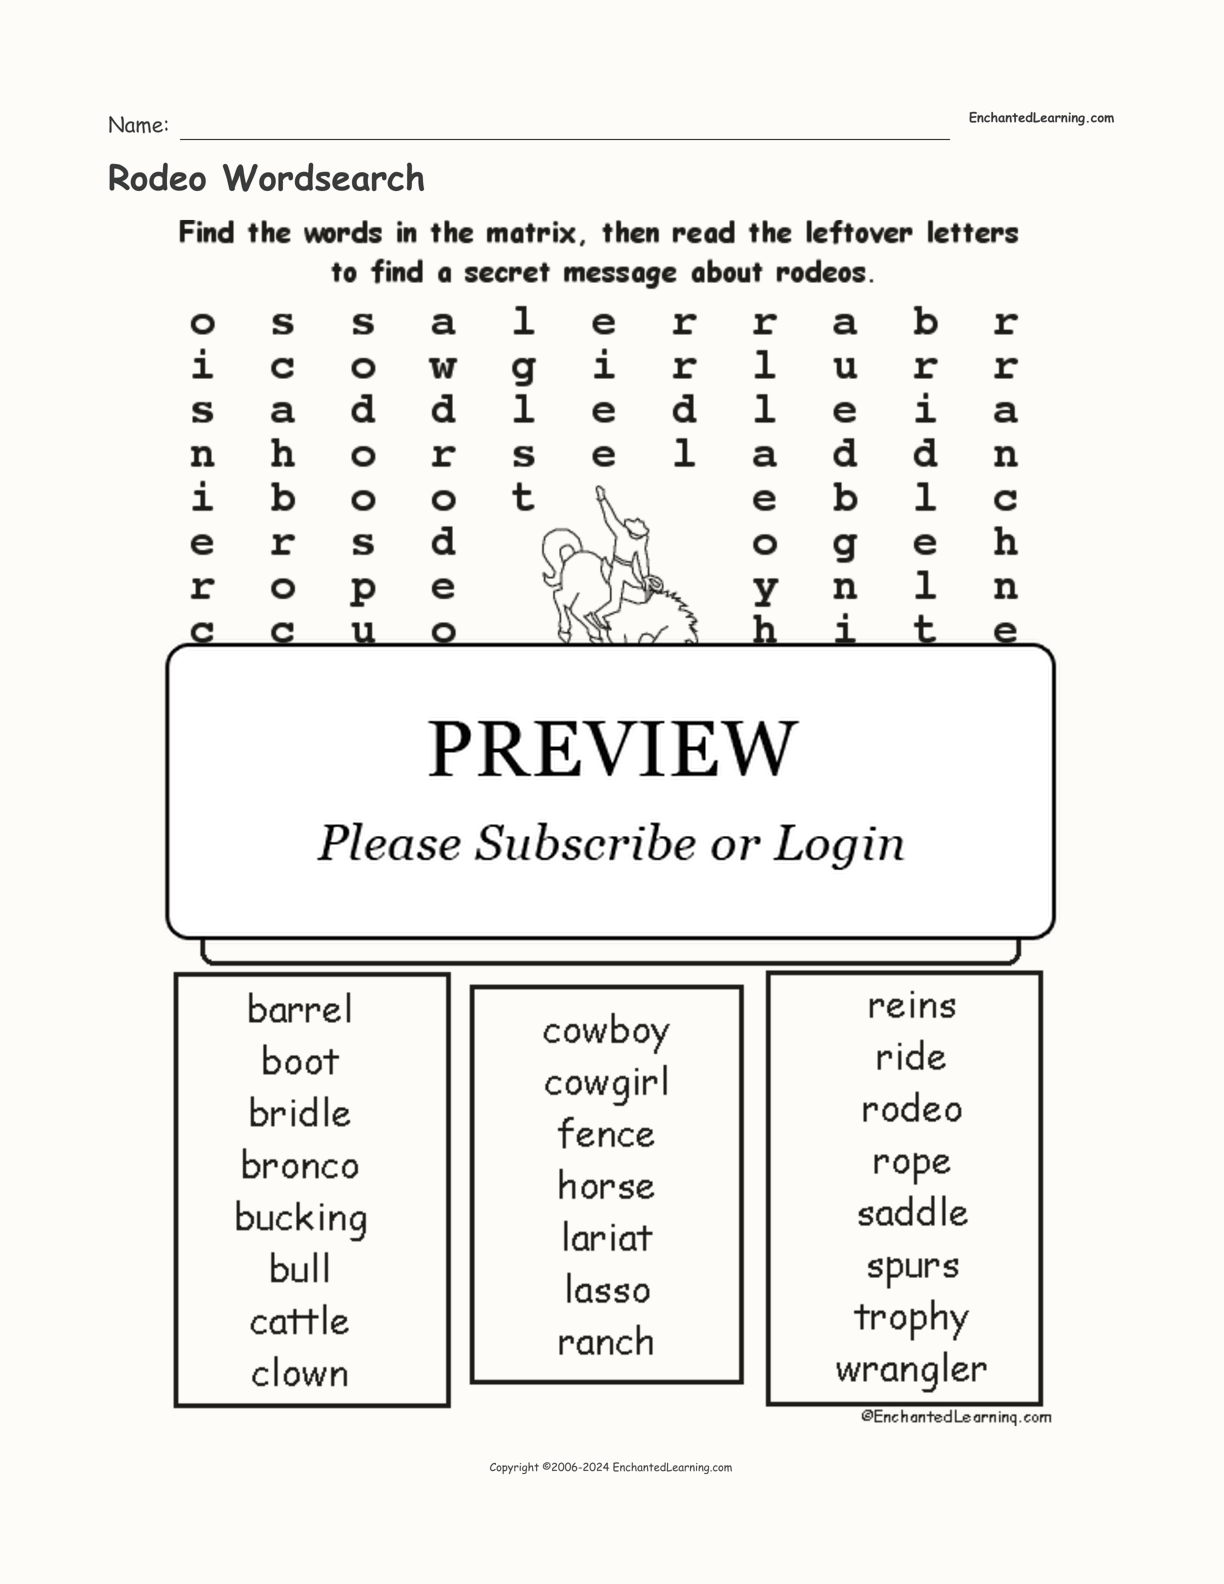 Rodeo Wordsearch interactive worksheet page 1